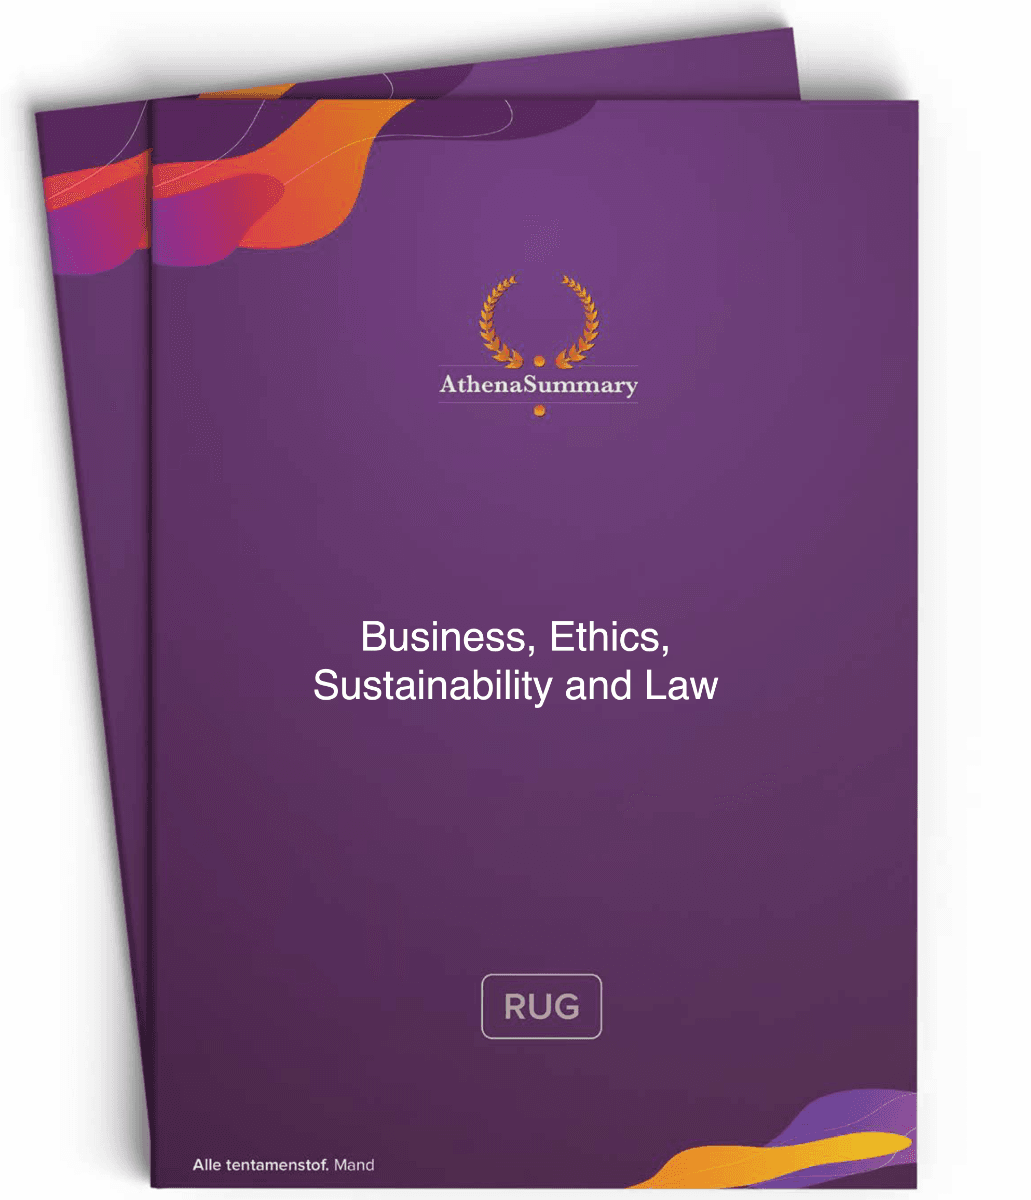 Literature Summary - Business, Ethics, Sustainability and Law